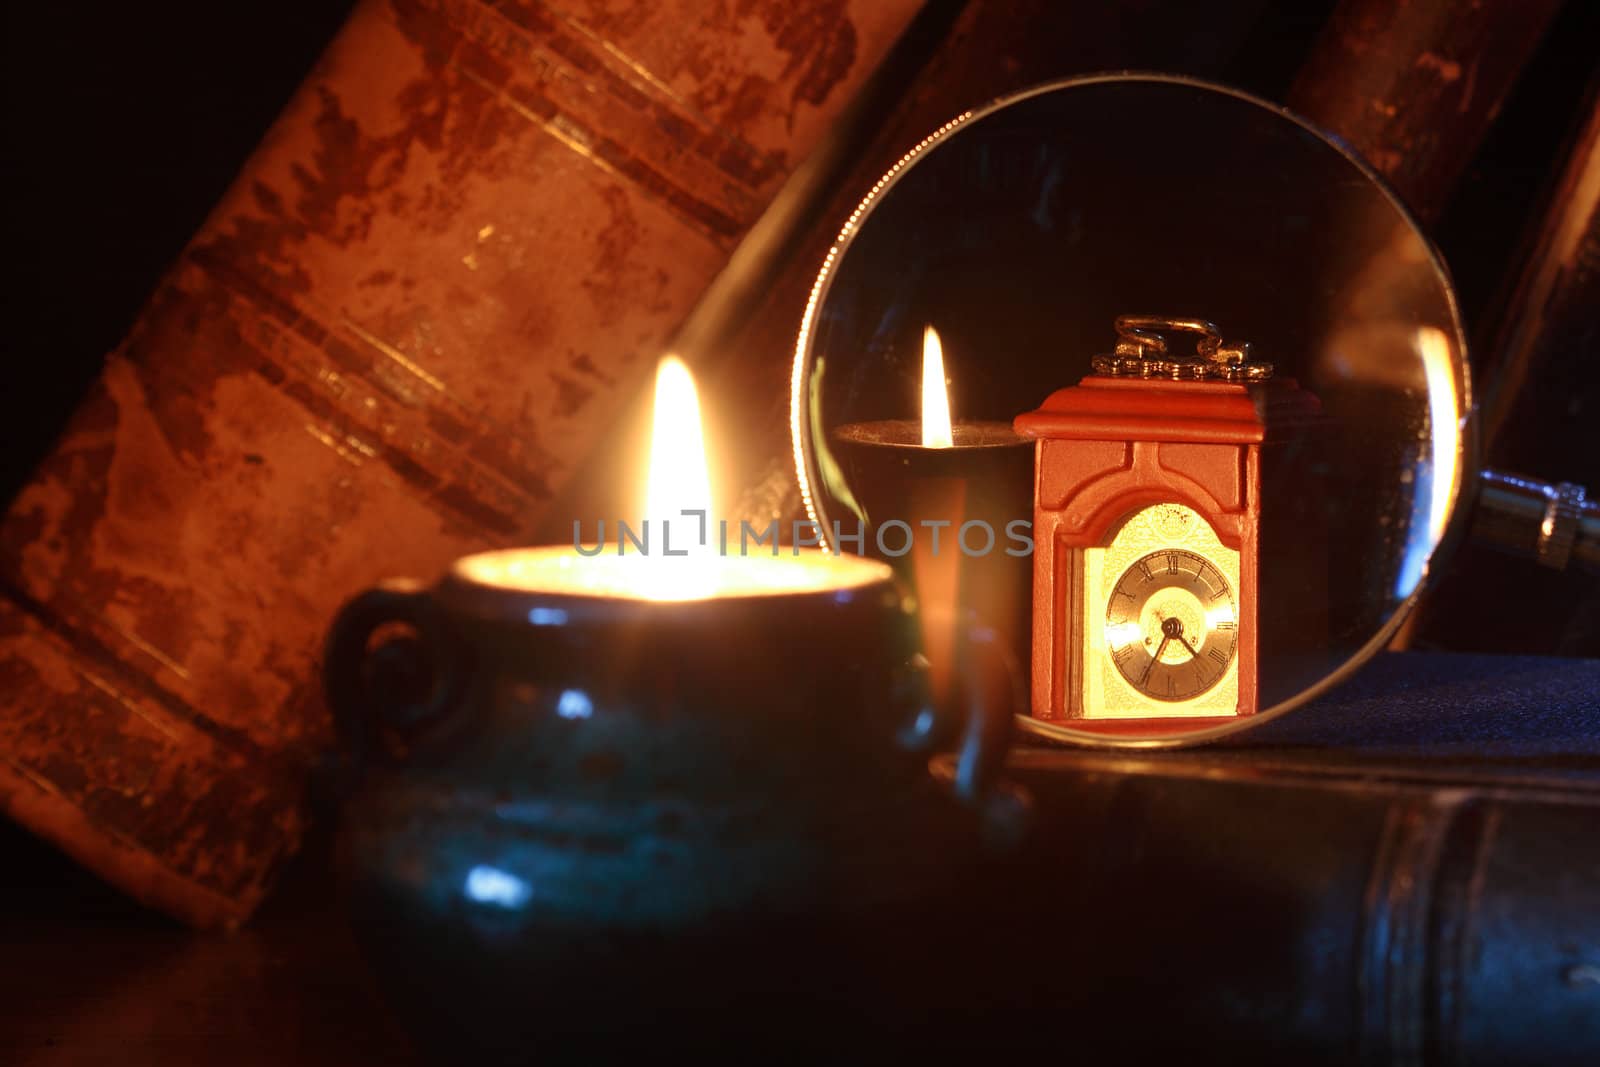 Vintage still life with old books, clock, magnifier glass and burning candle